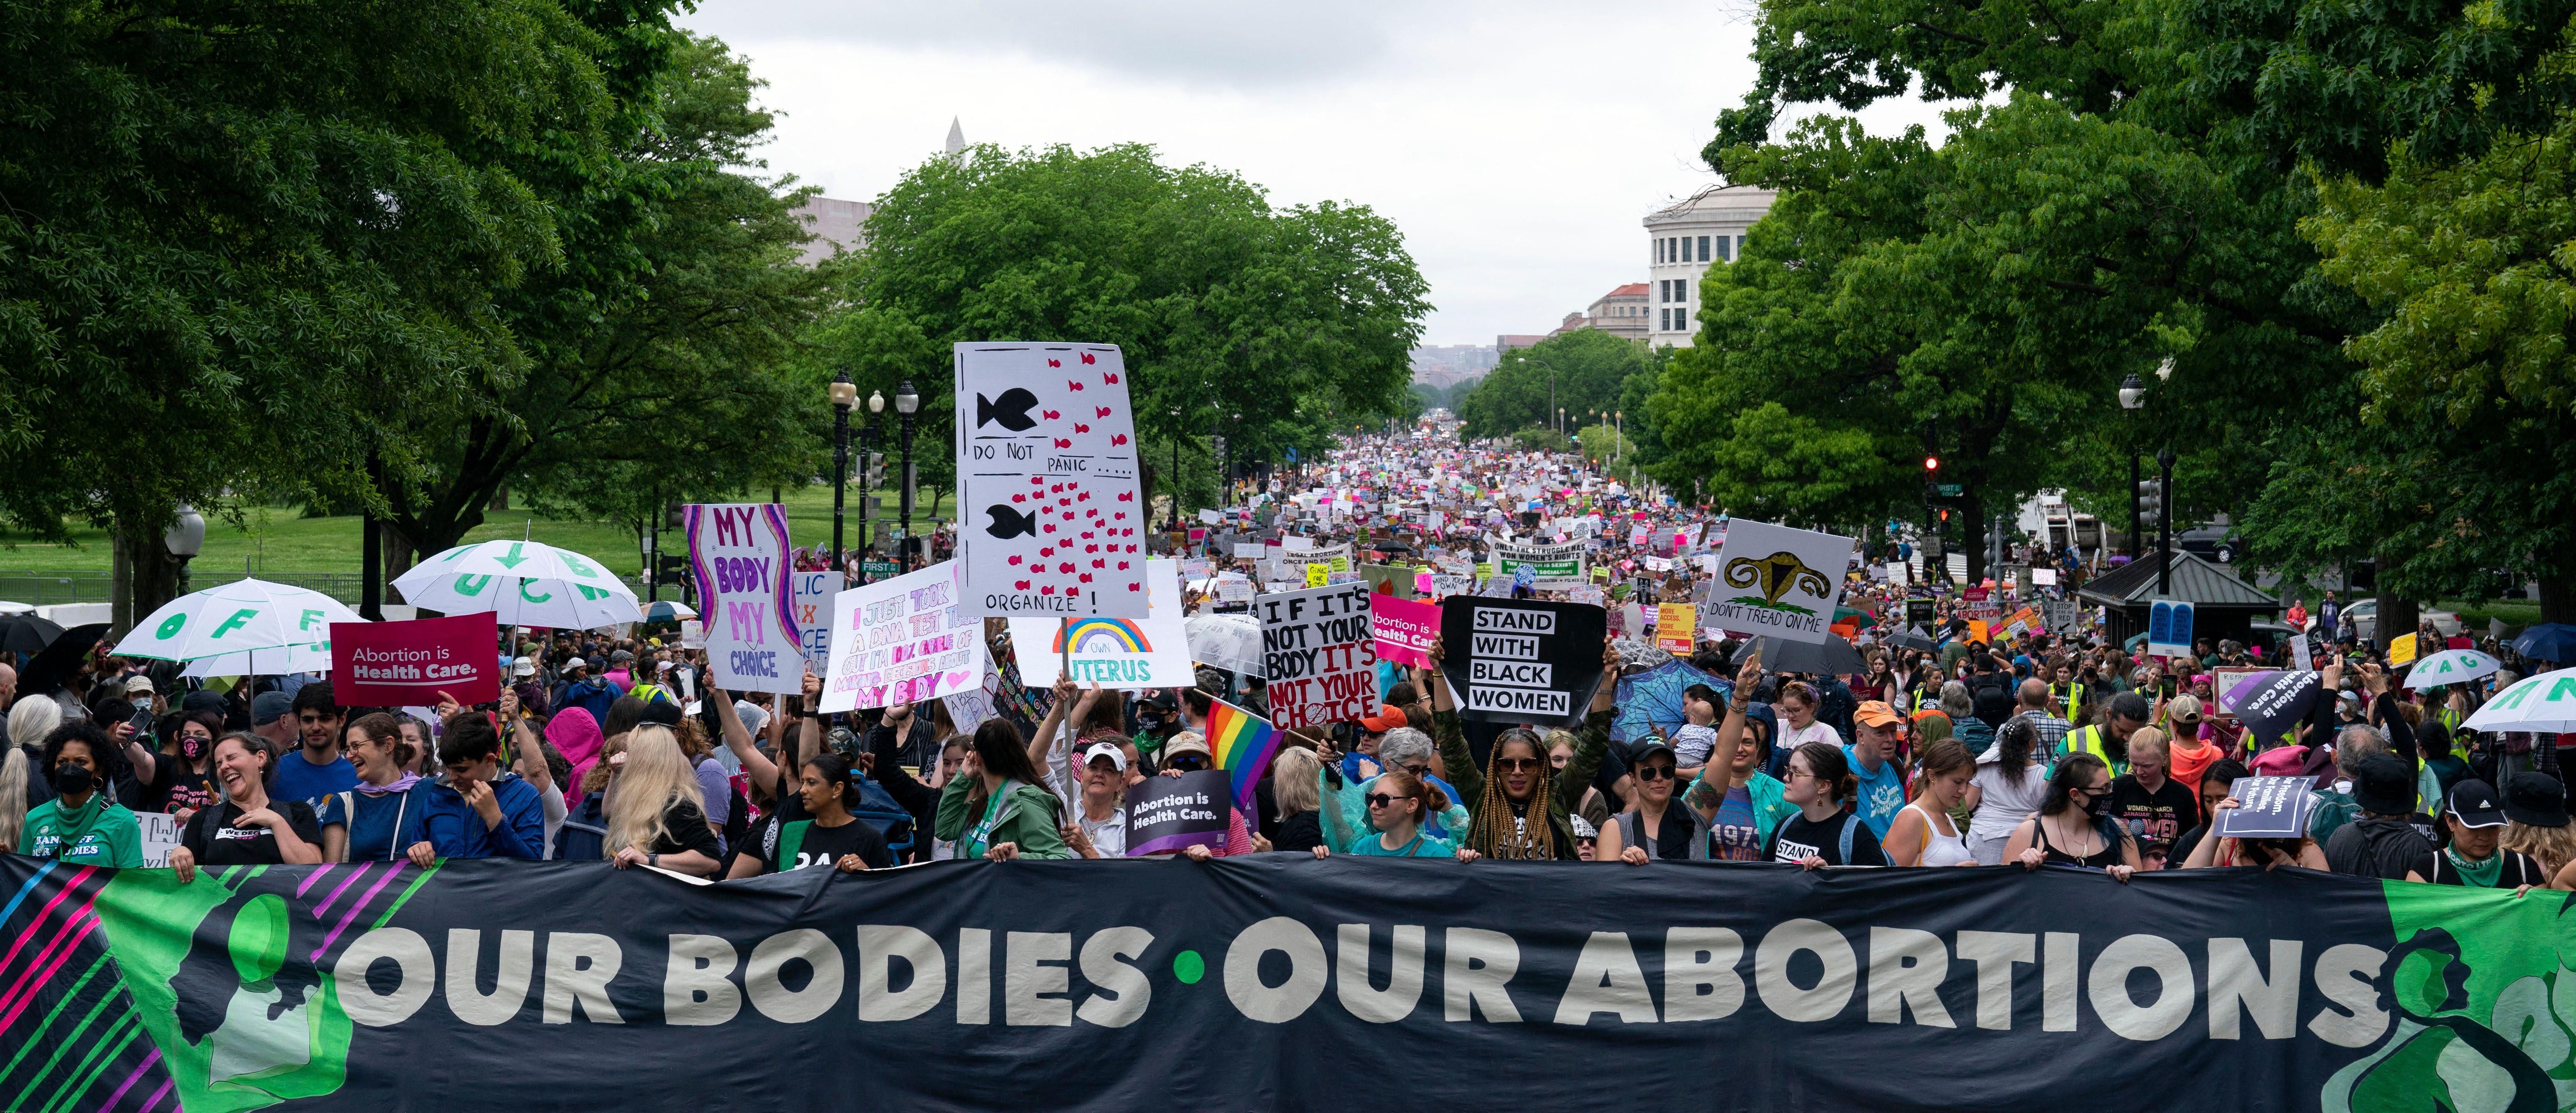 Abortion rights protesters in Washington, DC